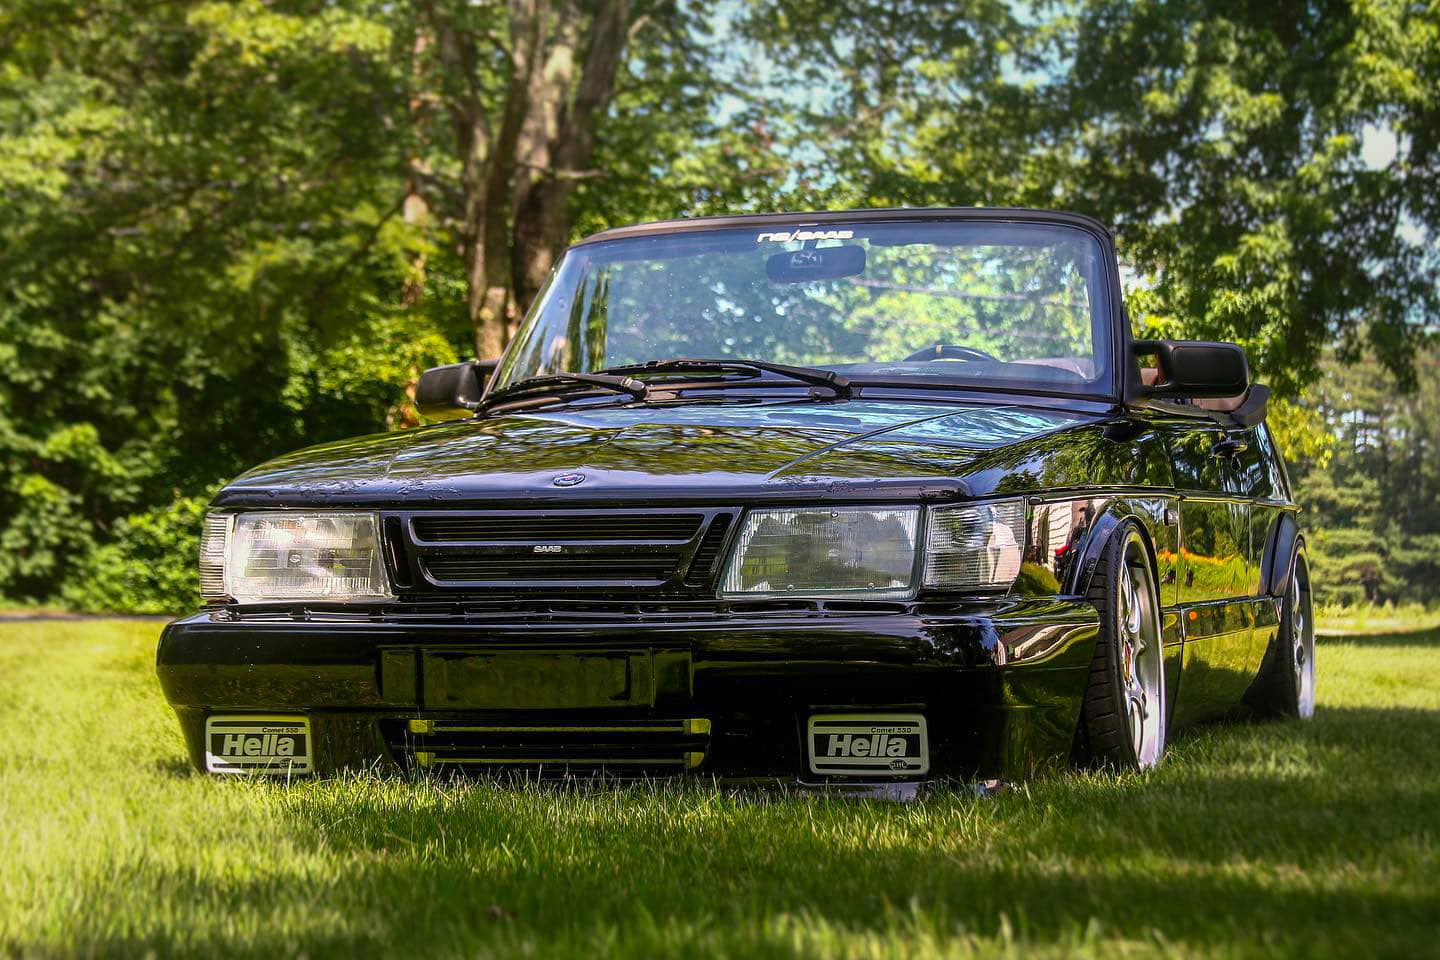 Modified Saab 900 with Airflow body kit slammed on custom air suspension